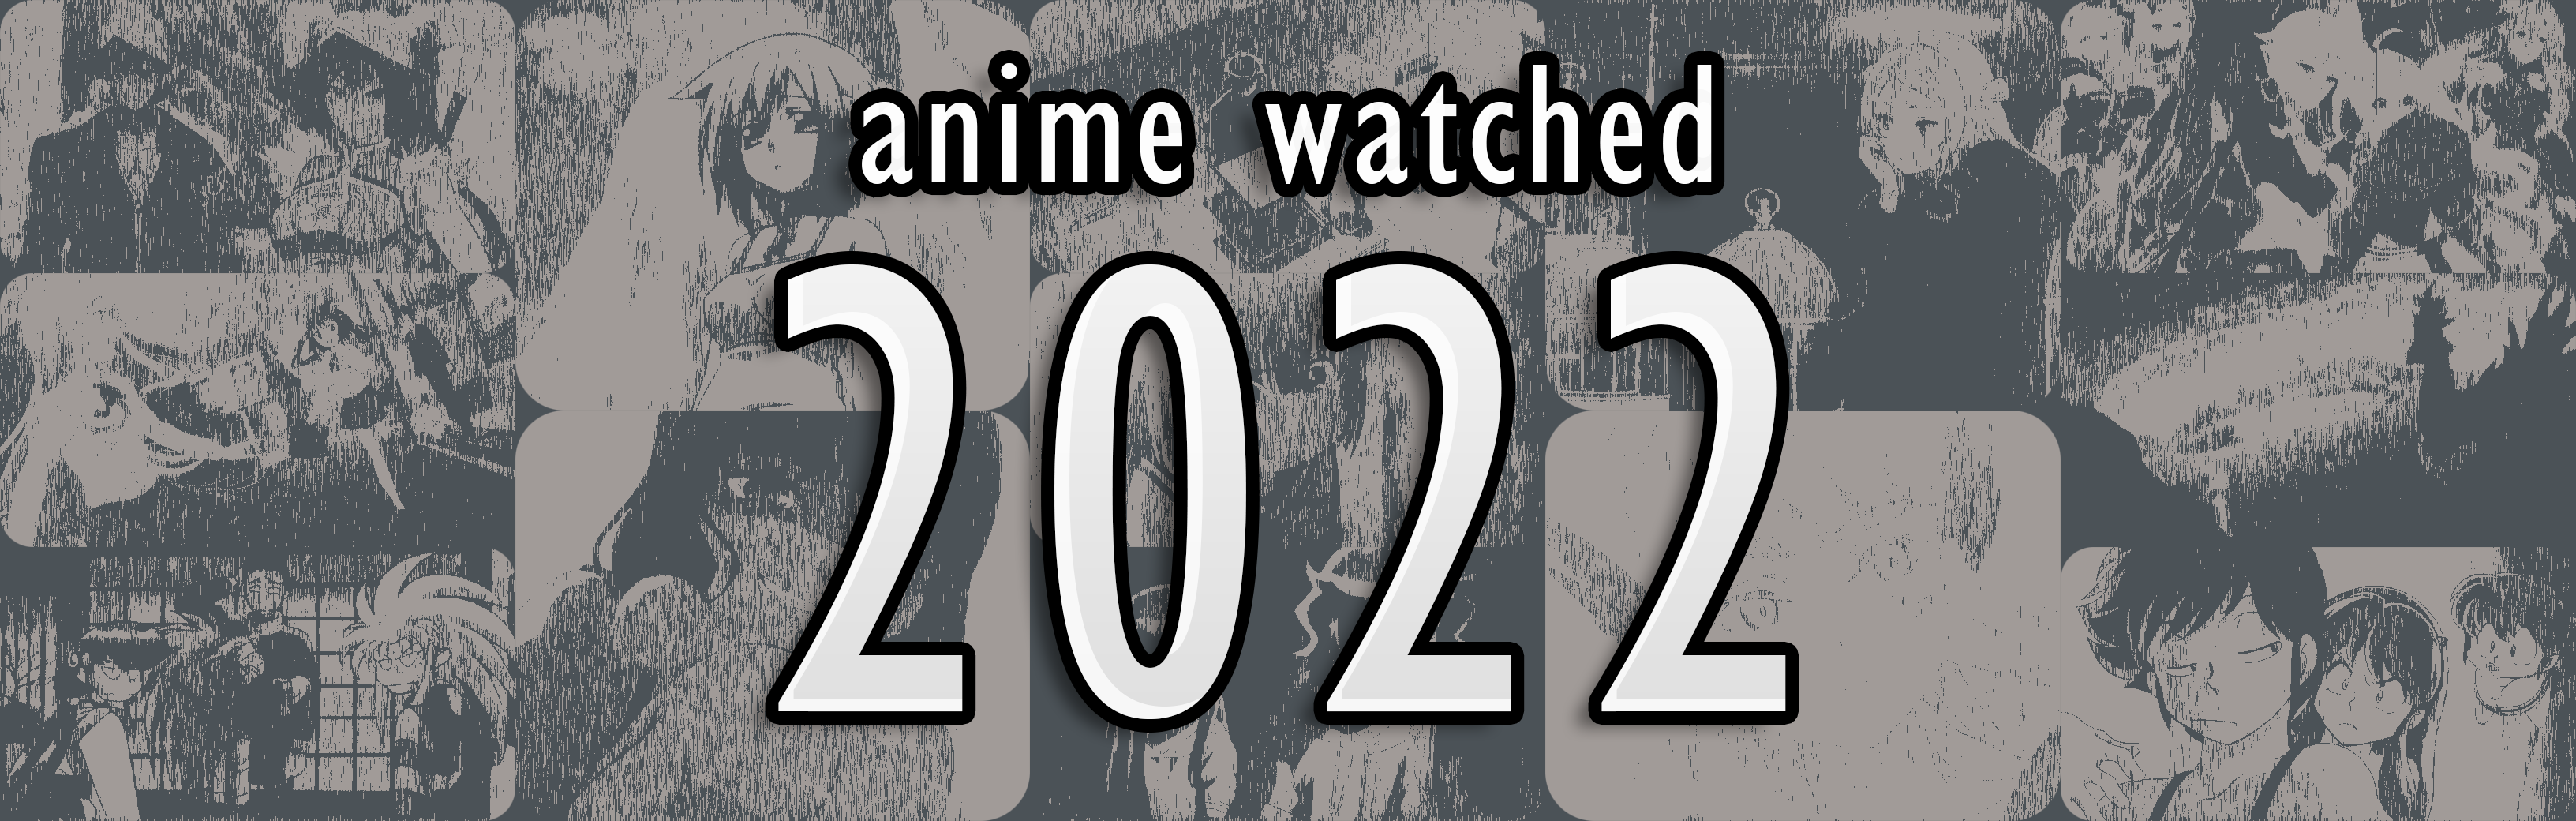 Anime I Watched in 2022